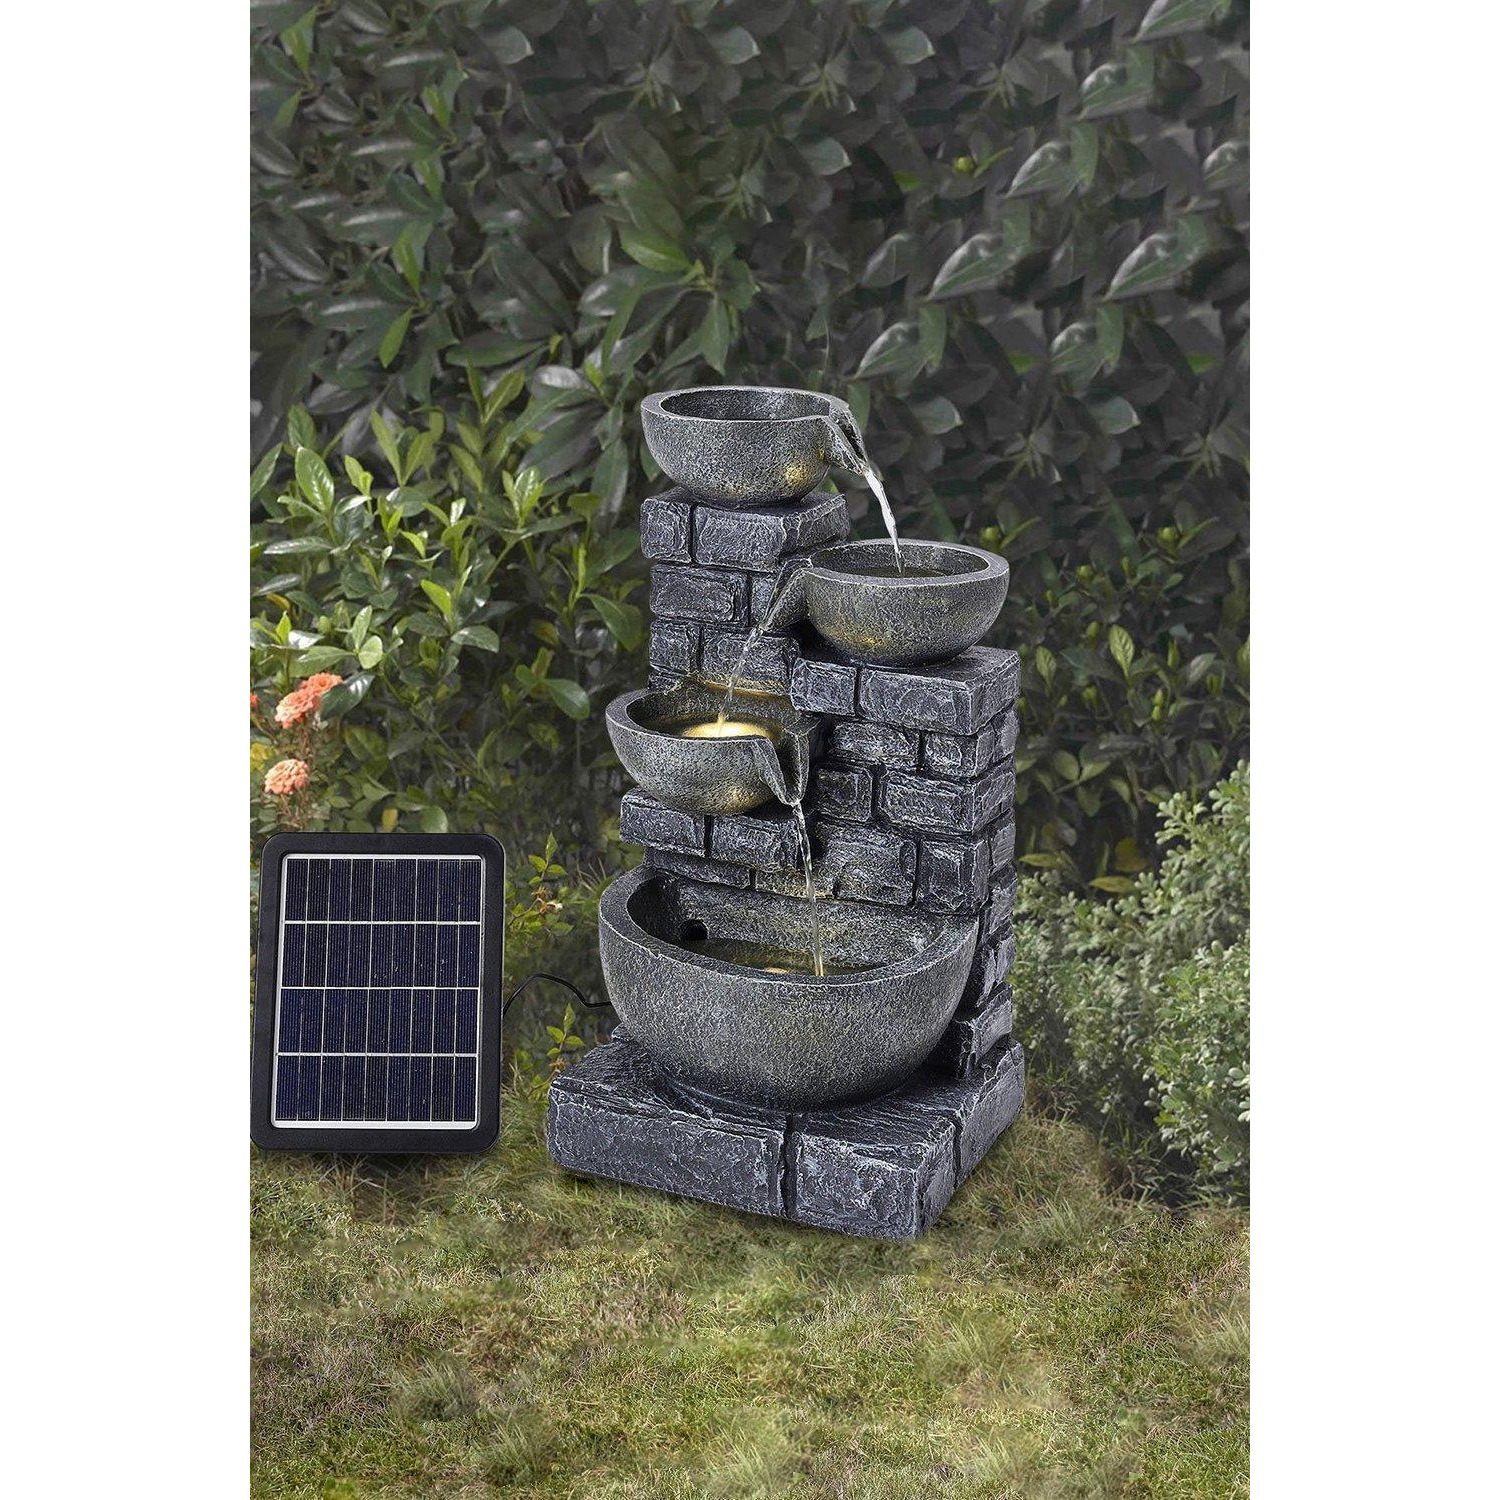 Rustic Solar Water Fountain with LED Lights - image 1